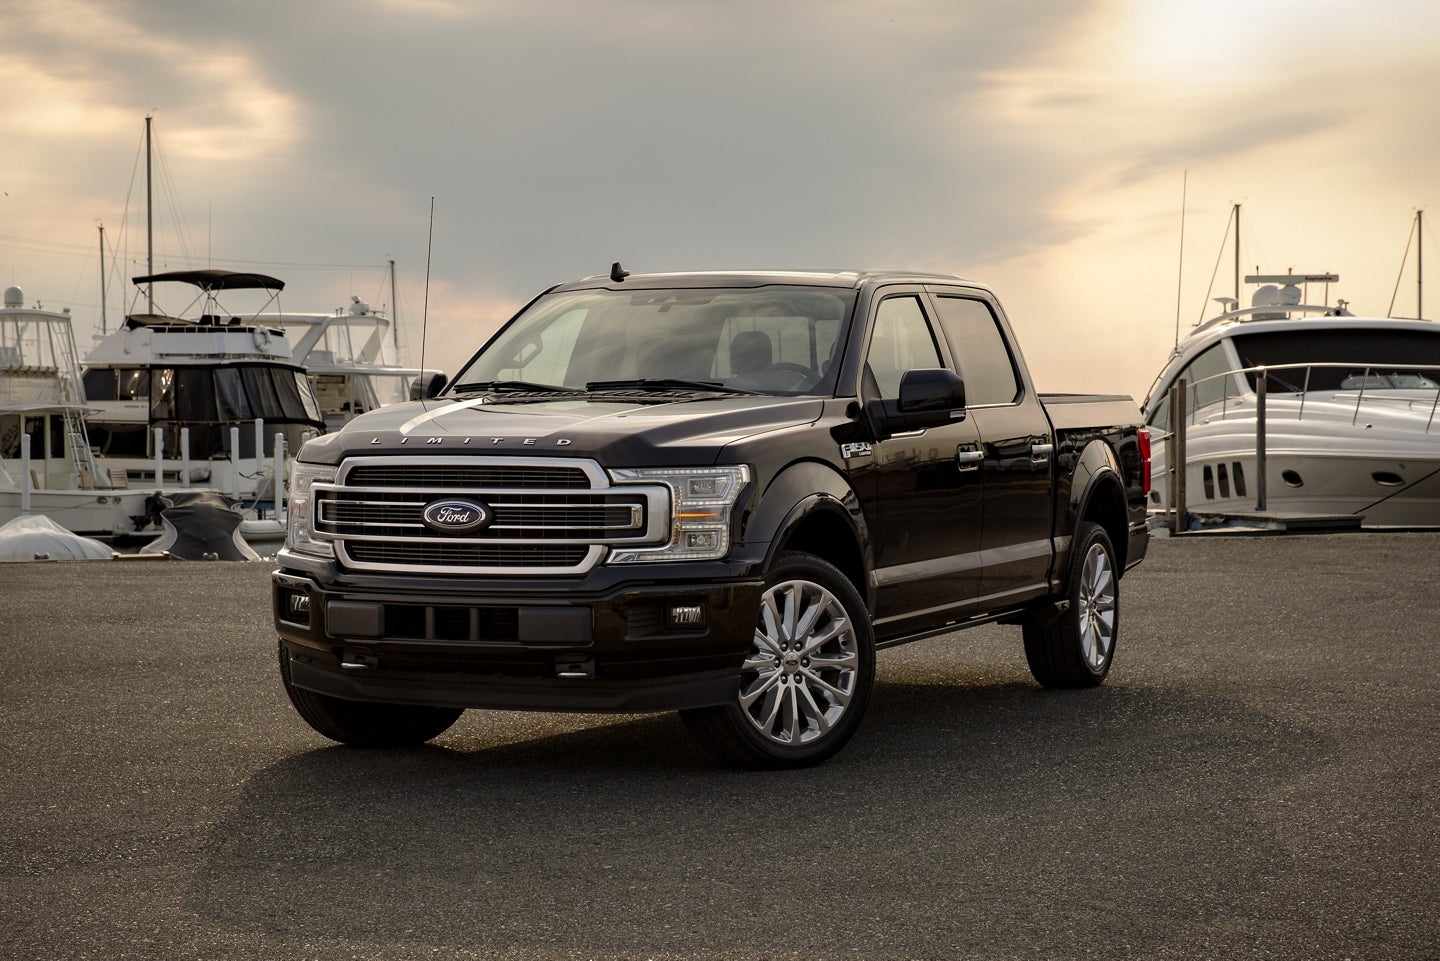 2020 Ford F-150 for Sale near Fort Rucker, AL